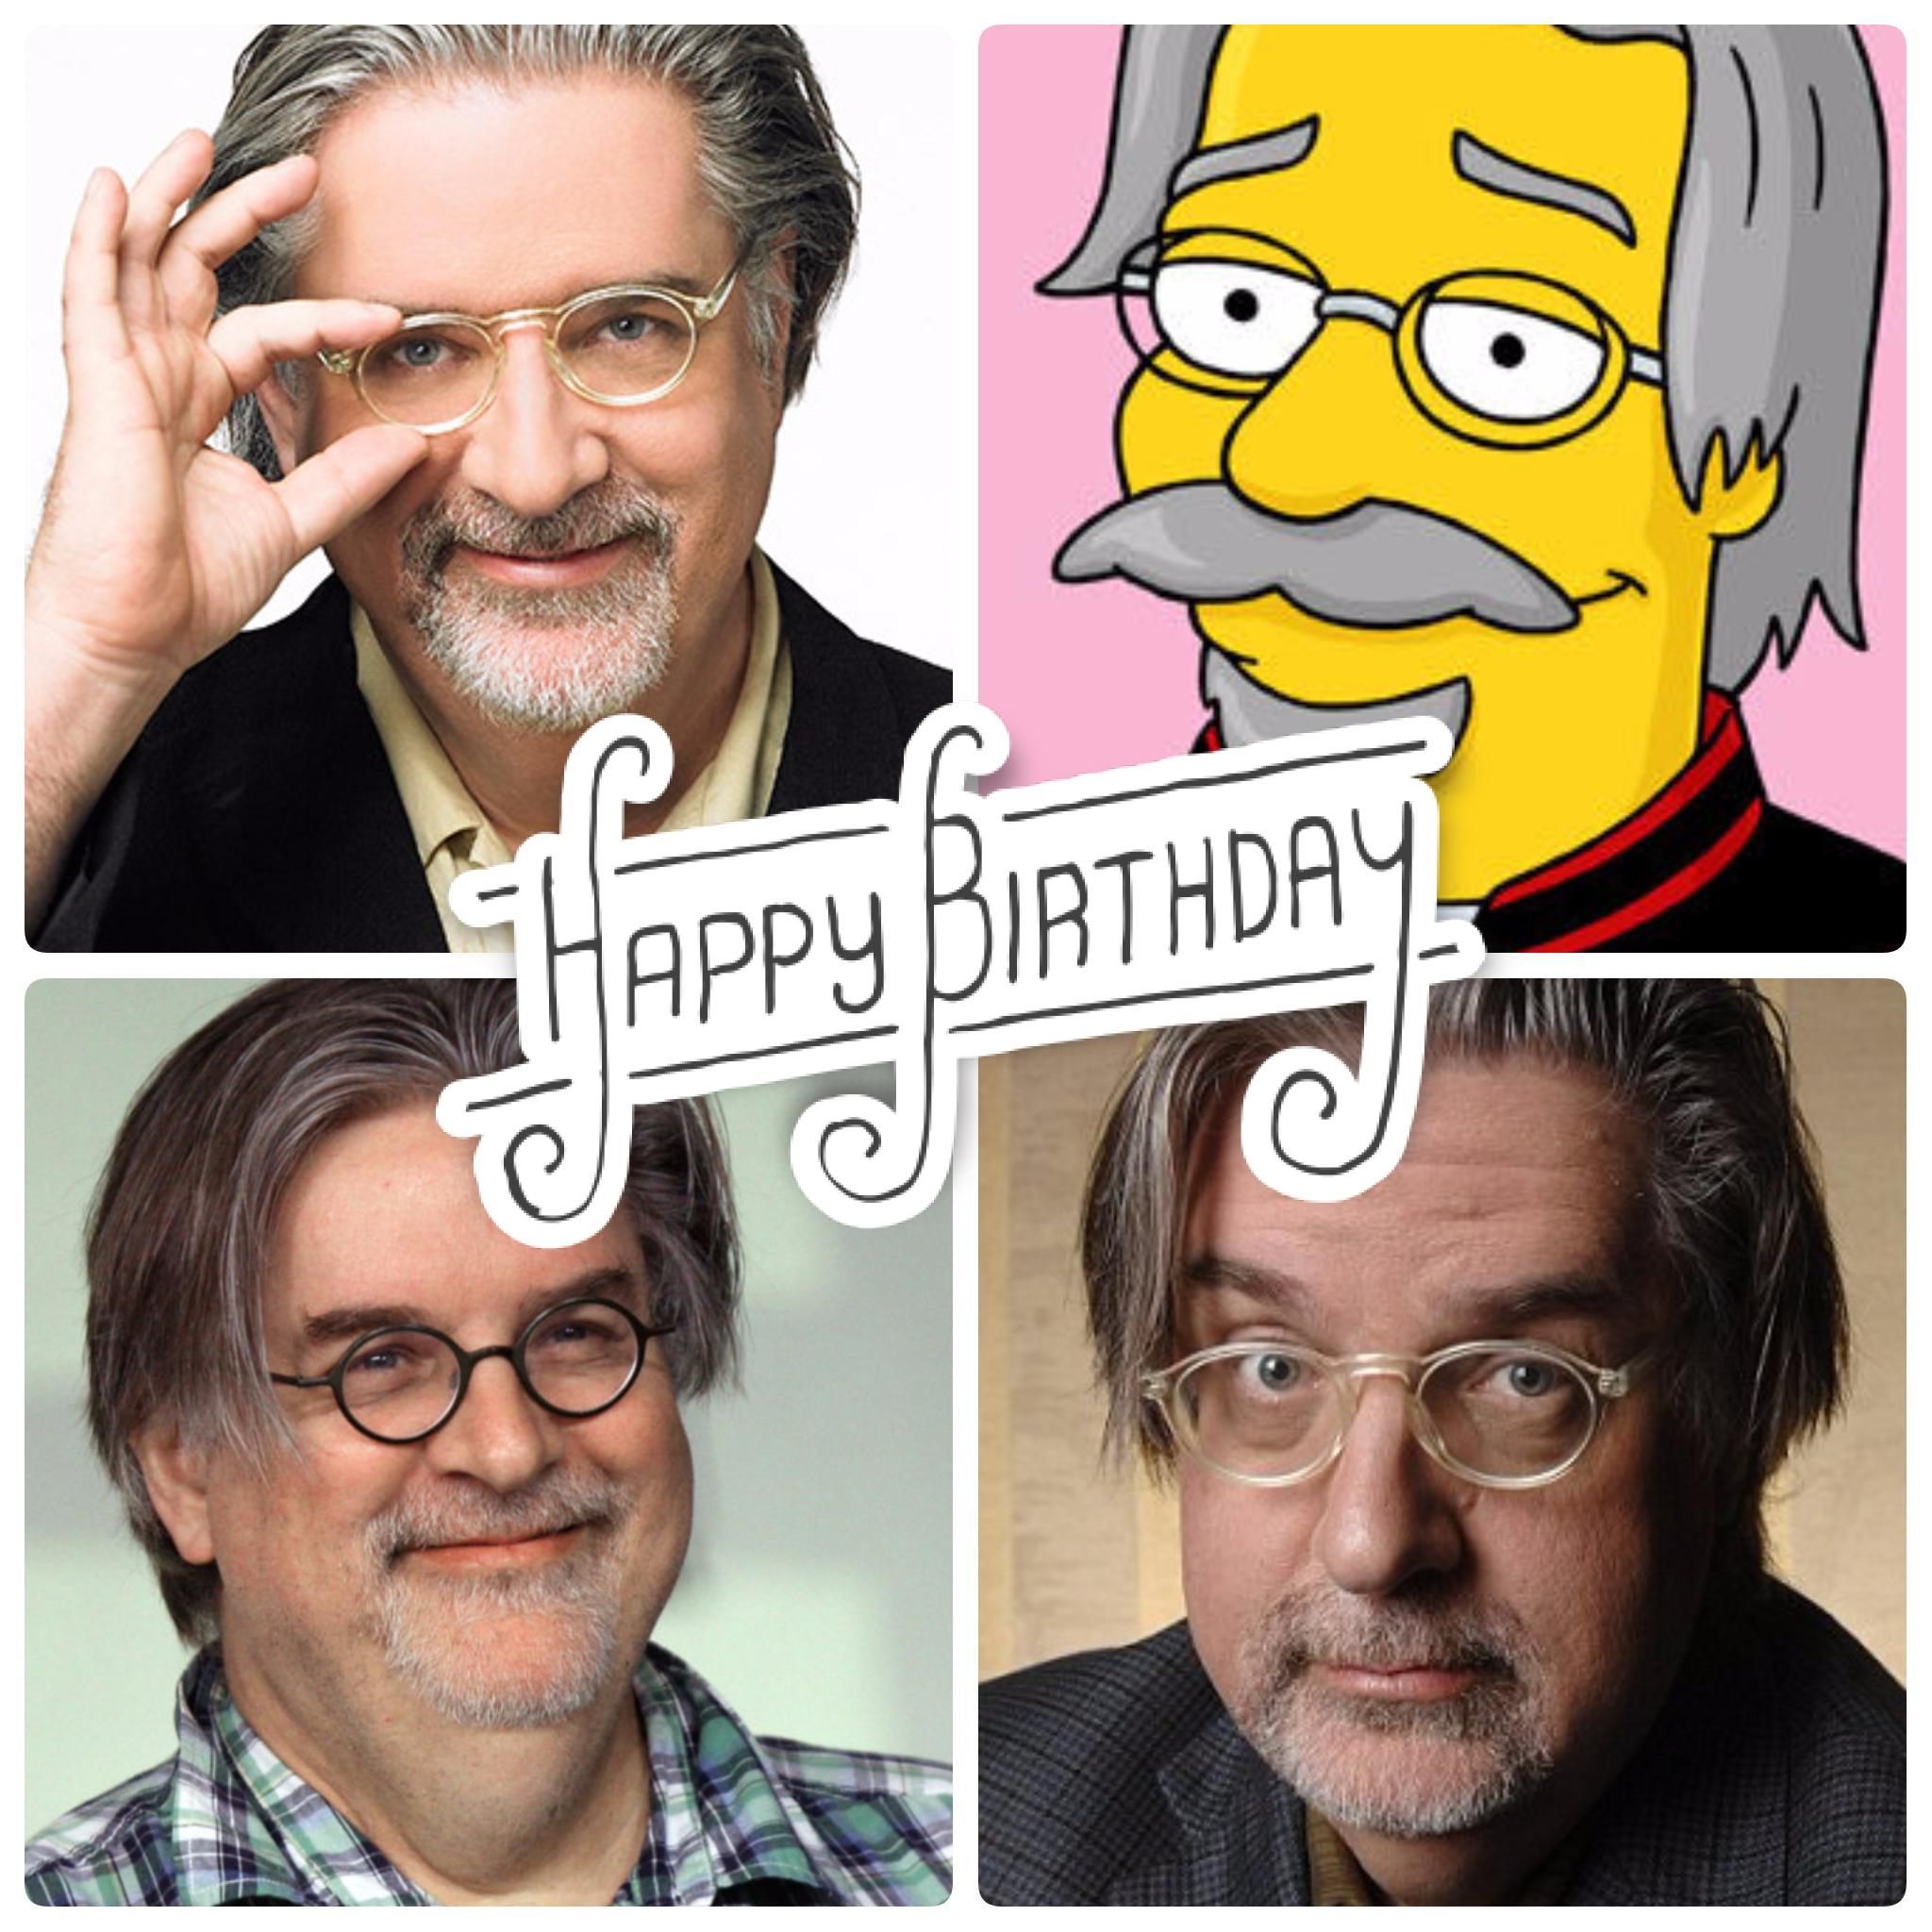 Happy Birthday, Matt Groening!! 
Where would we be without 